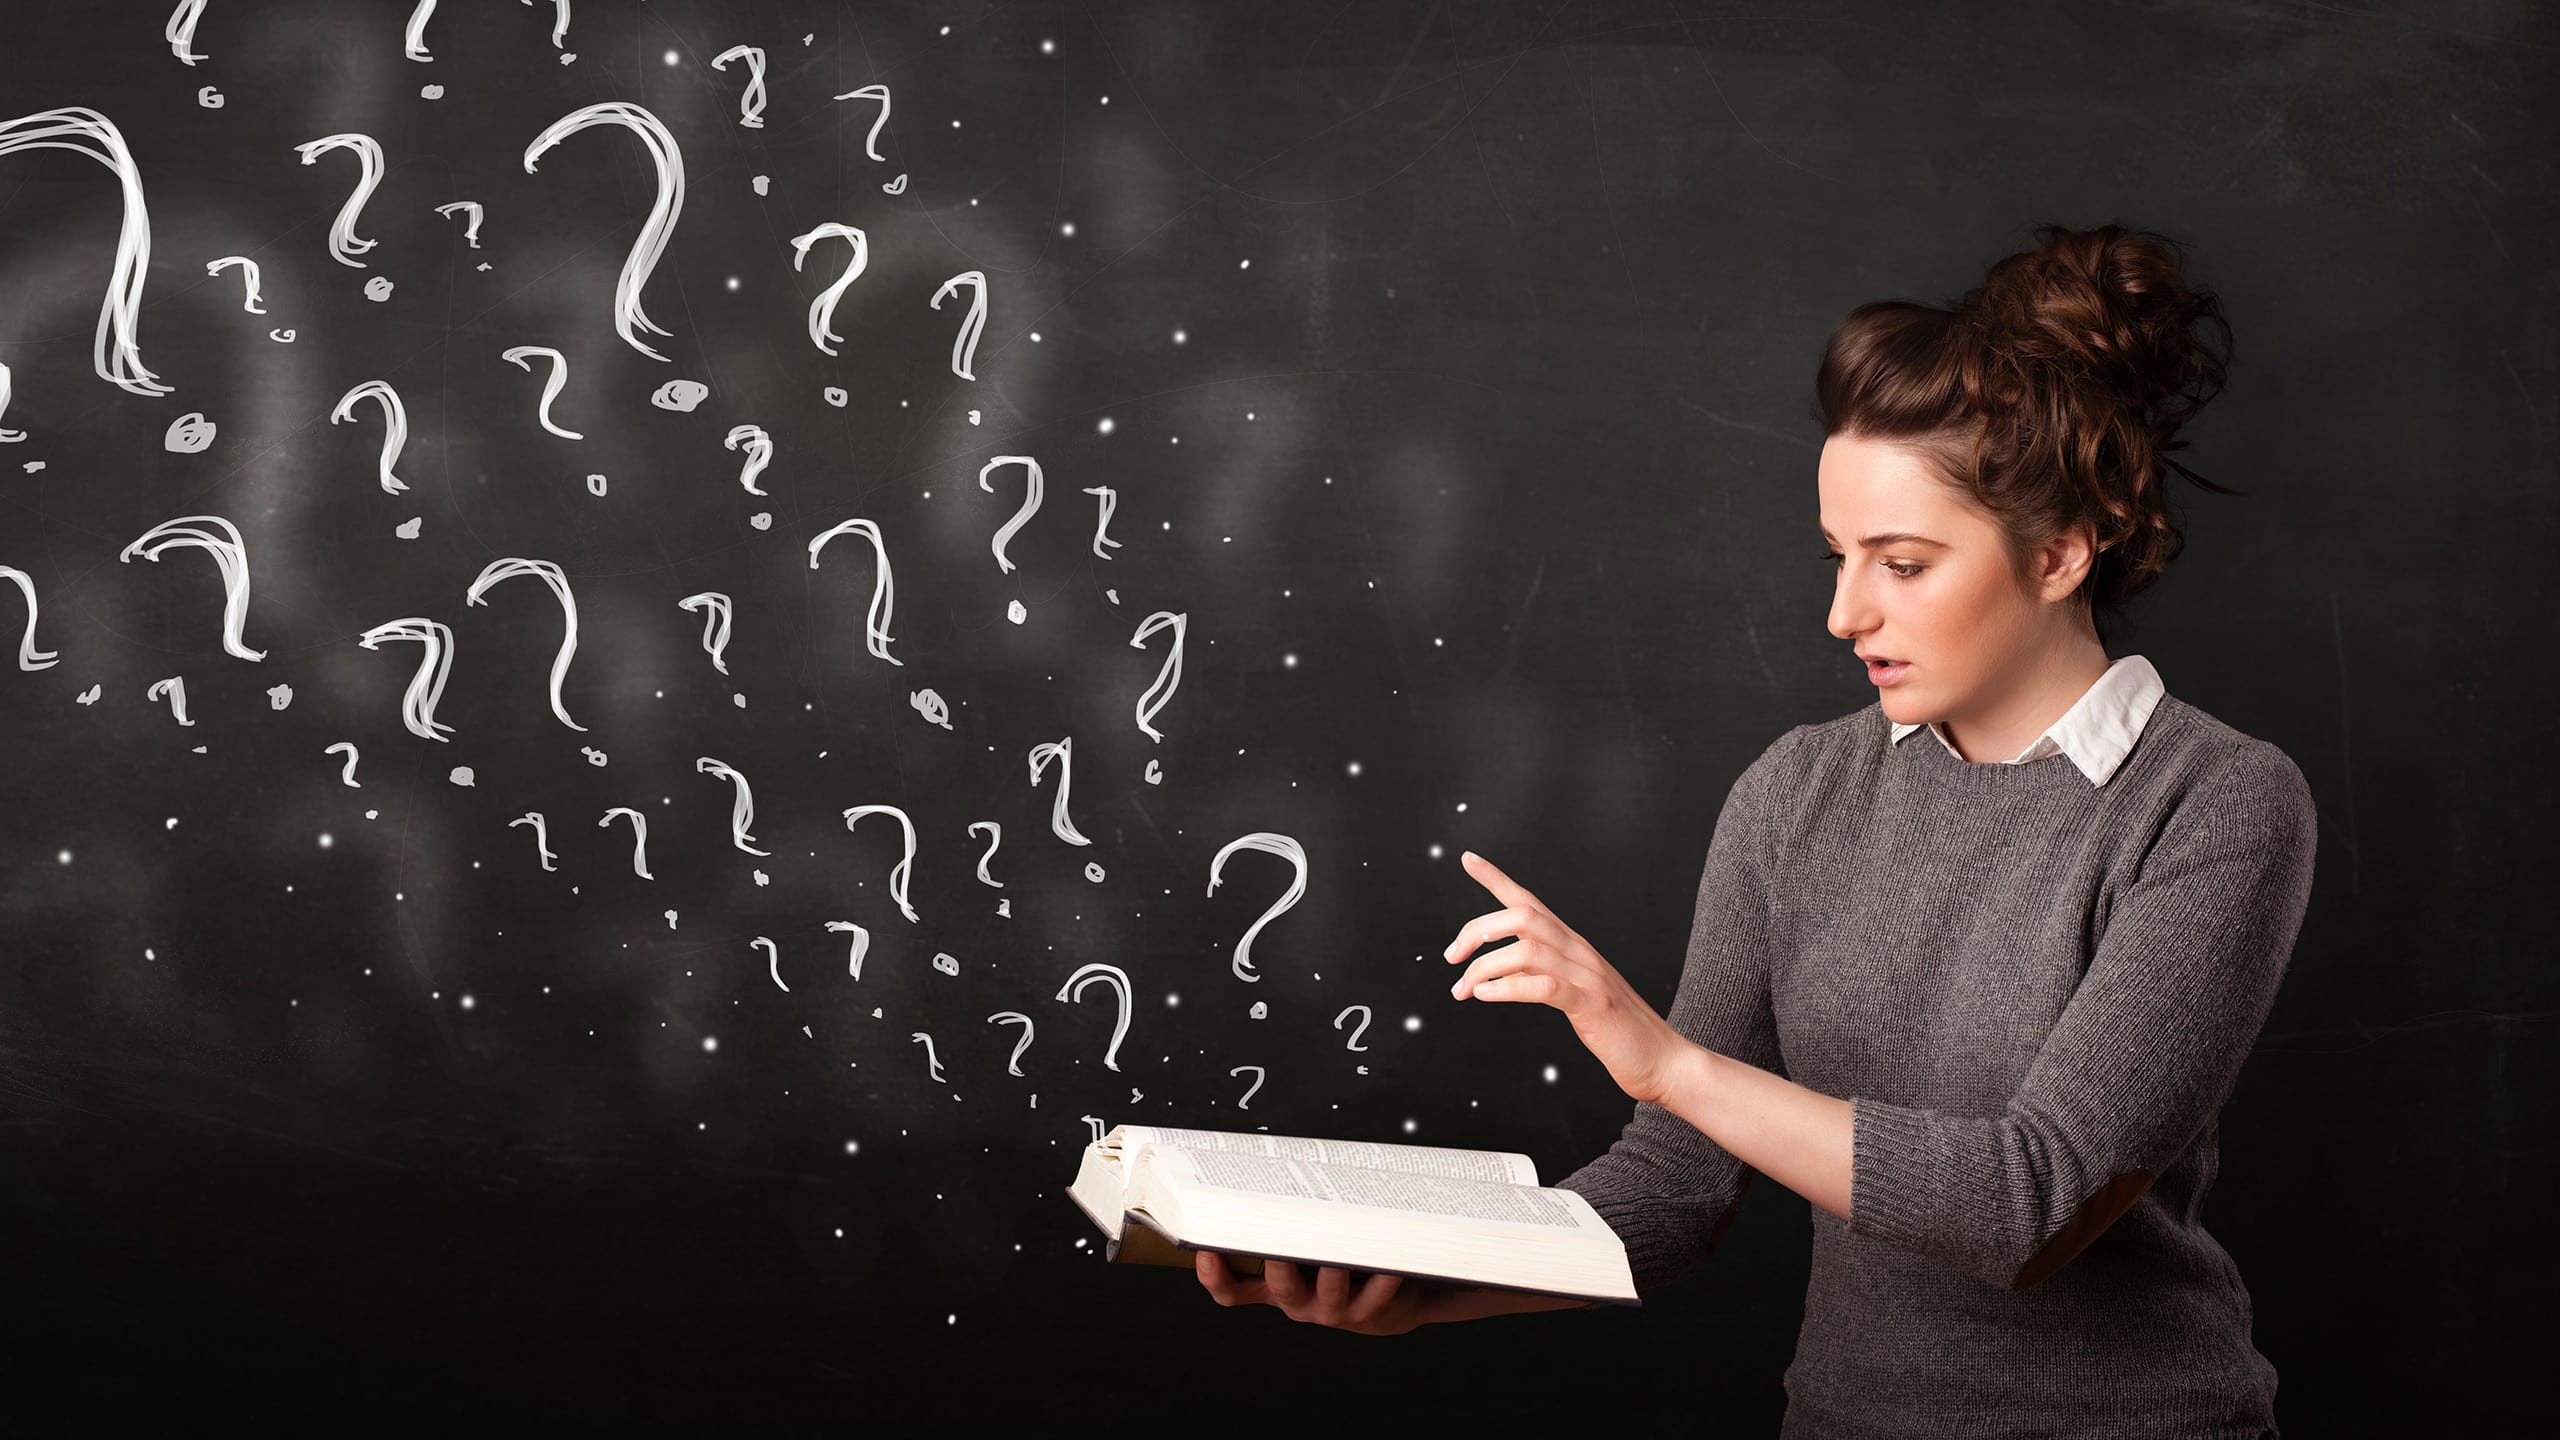 A woman holding an open book that has many different sized questions marks coming out of the book